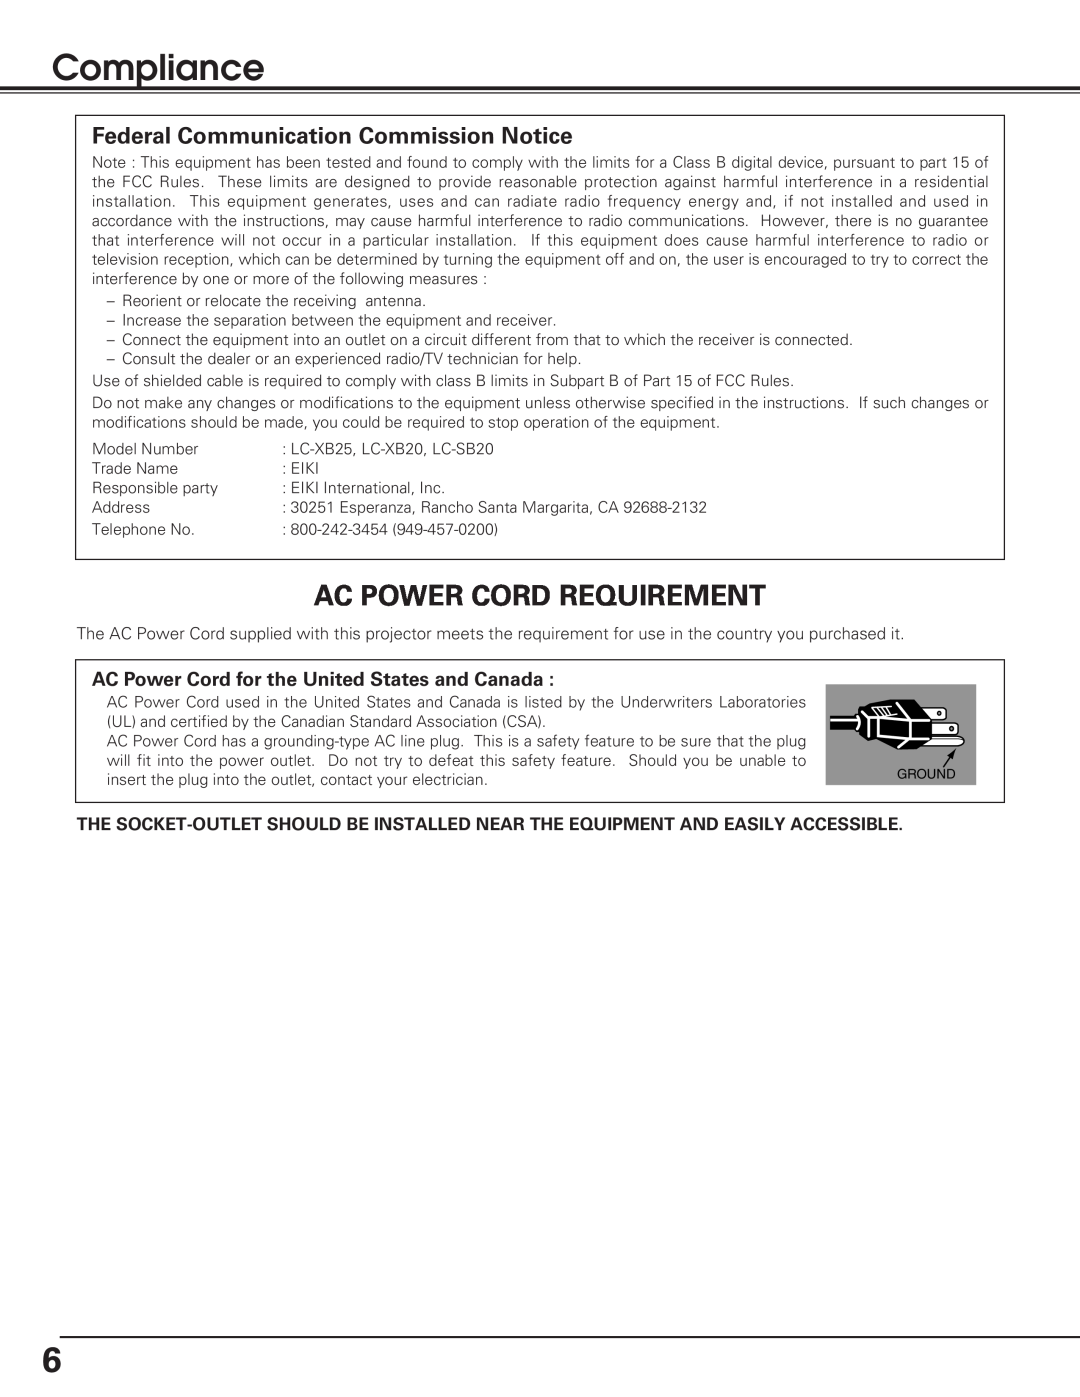 Eiki LC-SB20, LC-XB25, LC-XB20 owner manual Compliance, Ac Power Cord Requirement, Federal Communication Commission Notice 